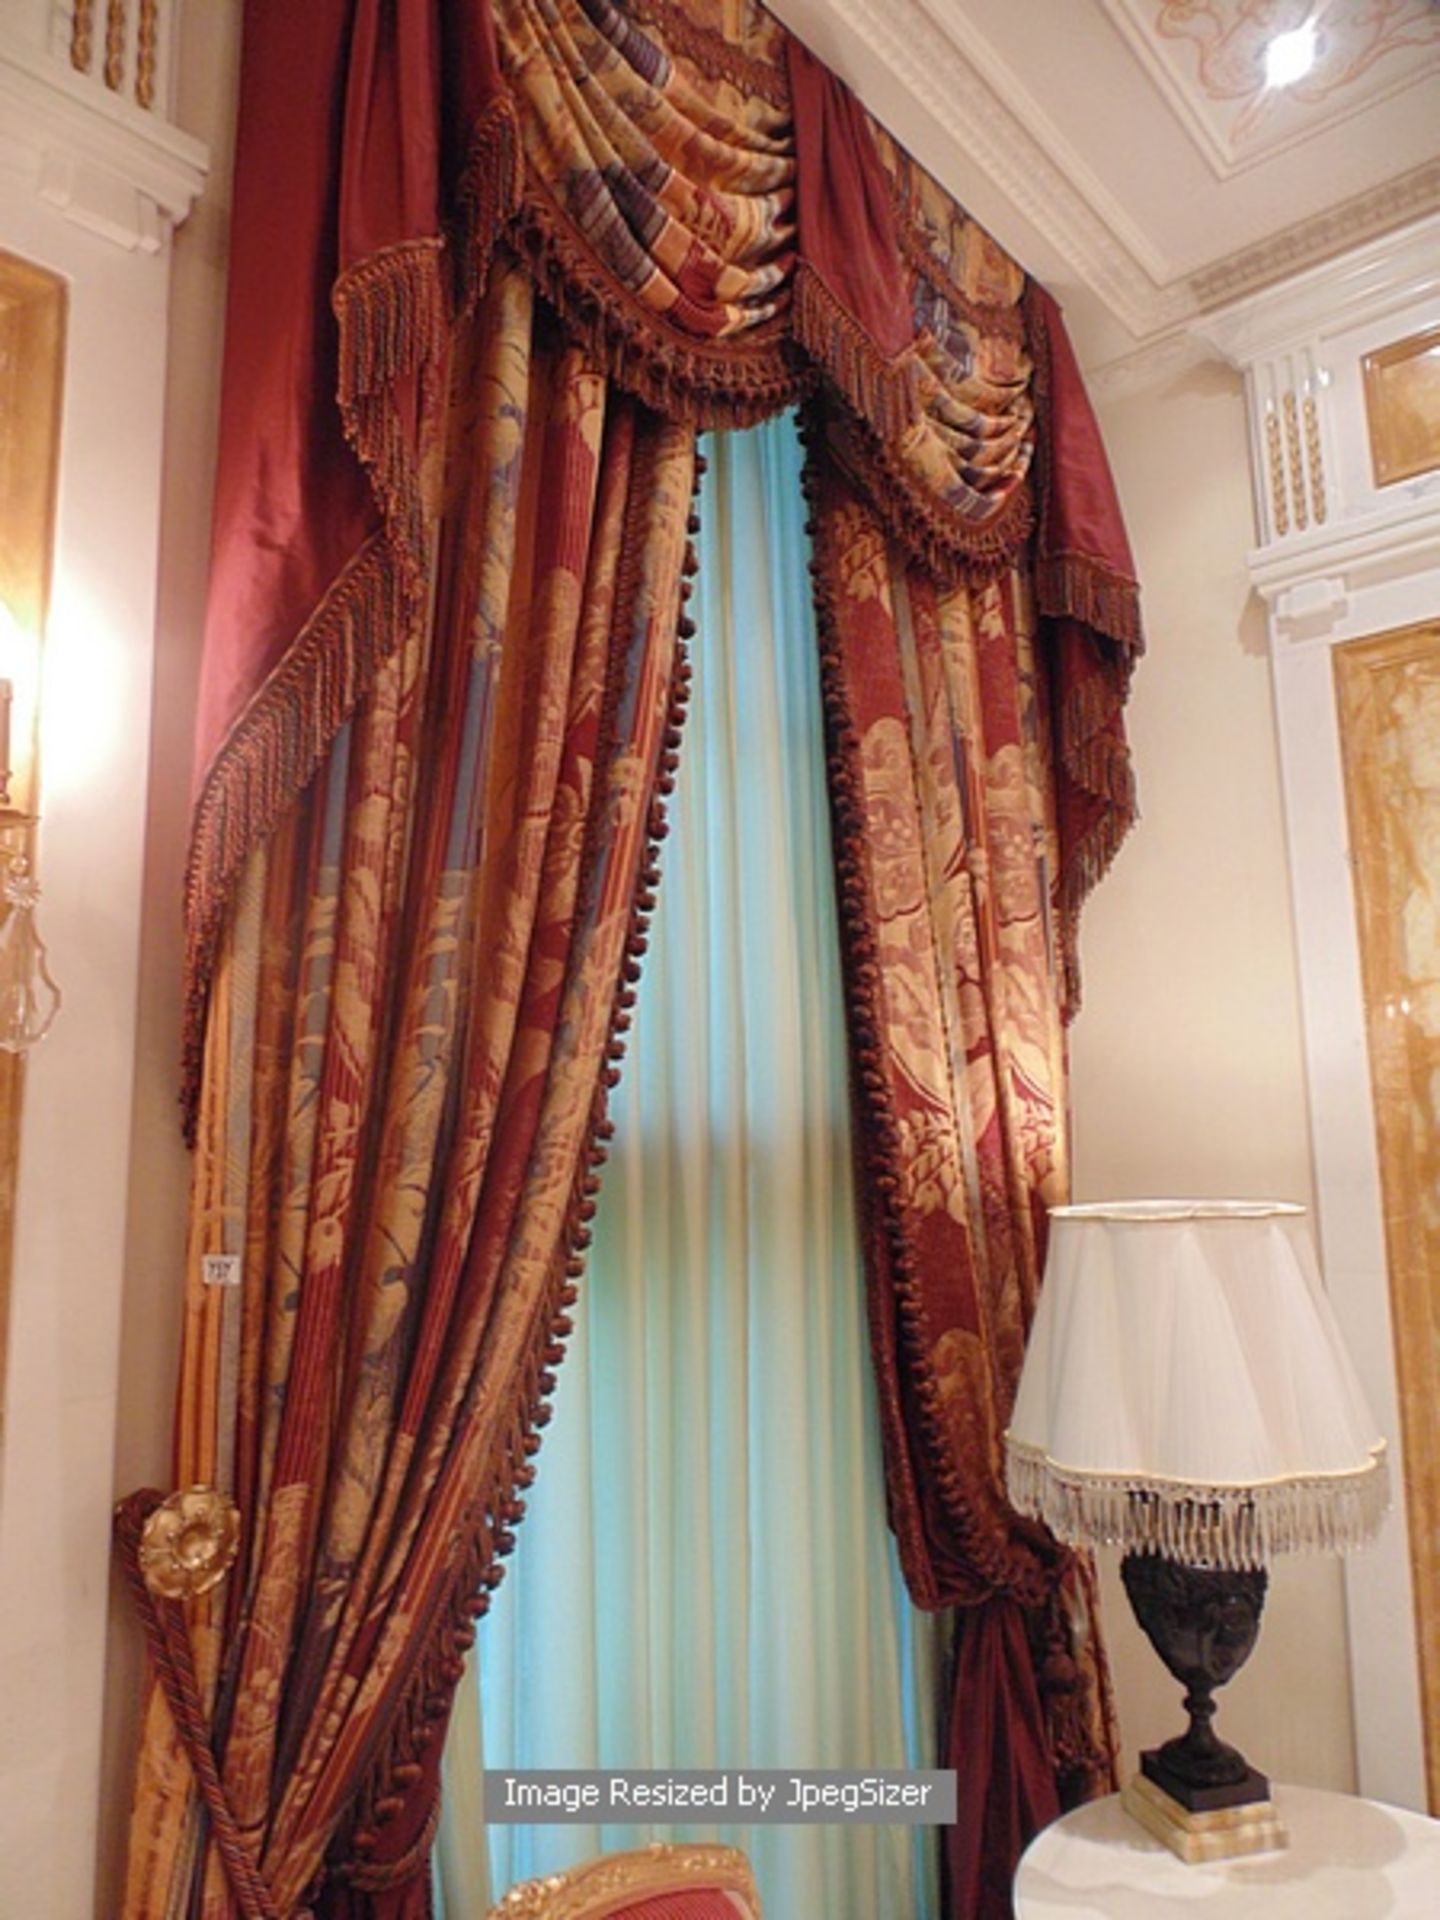 A pair of gold and burgundy curtains supplied by Jacquard from Rudolph Ackermann`s A series design - Image 5 of 5